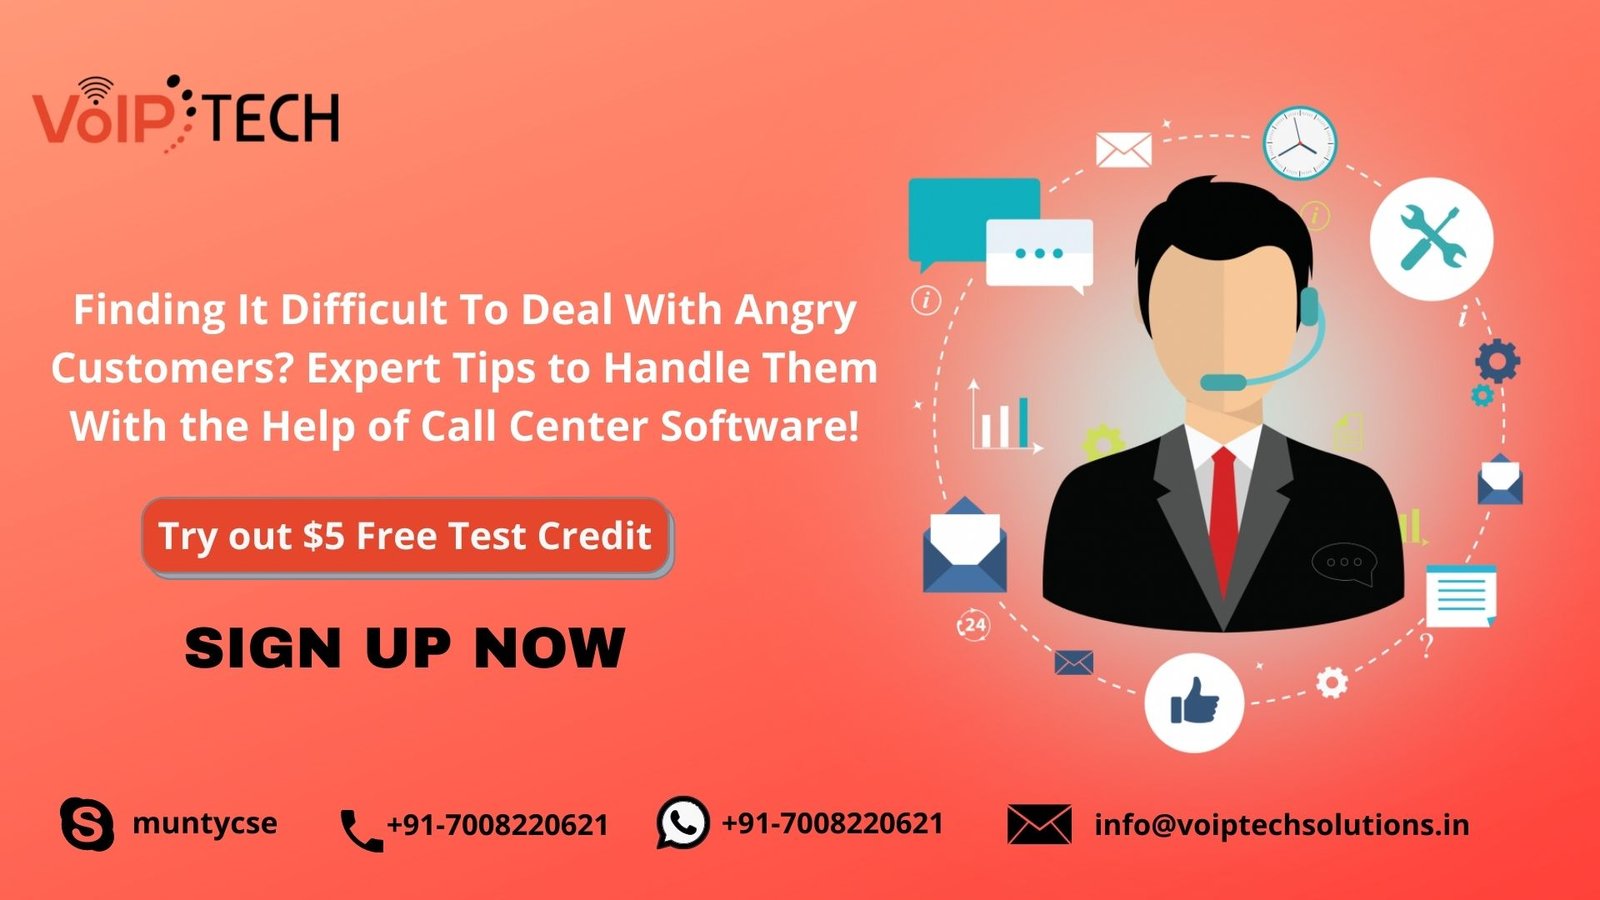 Finding It Difficult To Deal With Angry Customers? Expert Tips to Handle Them With the Help of Call Center Software!, Call Center SoftwareVoIP tech solutions, vici dialer, virtual number, Voip Providers, voip services in india, best sip provider, business voip providers, VoIP Phone Numbers, voip minutes provider, top voip providers, voip minutes, International VoIP Provider